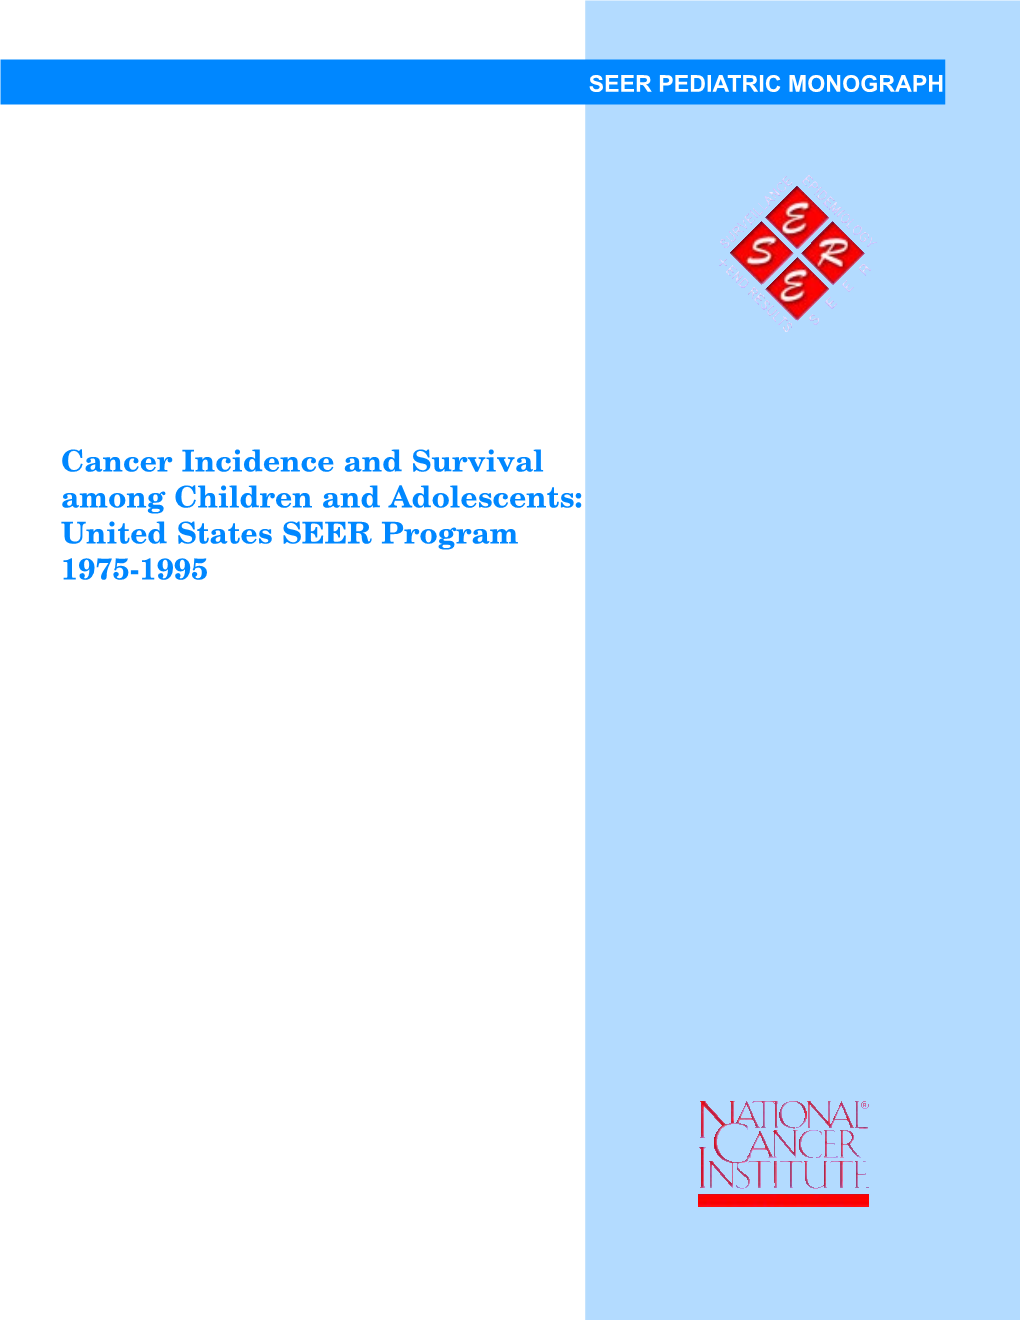 Cancer Incidence and Survival Among Children and Adolescents: United States SEER Program 1975-1995 This Publication Was Prepared By